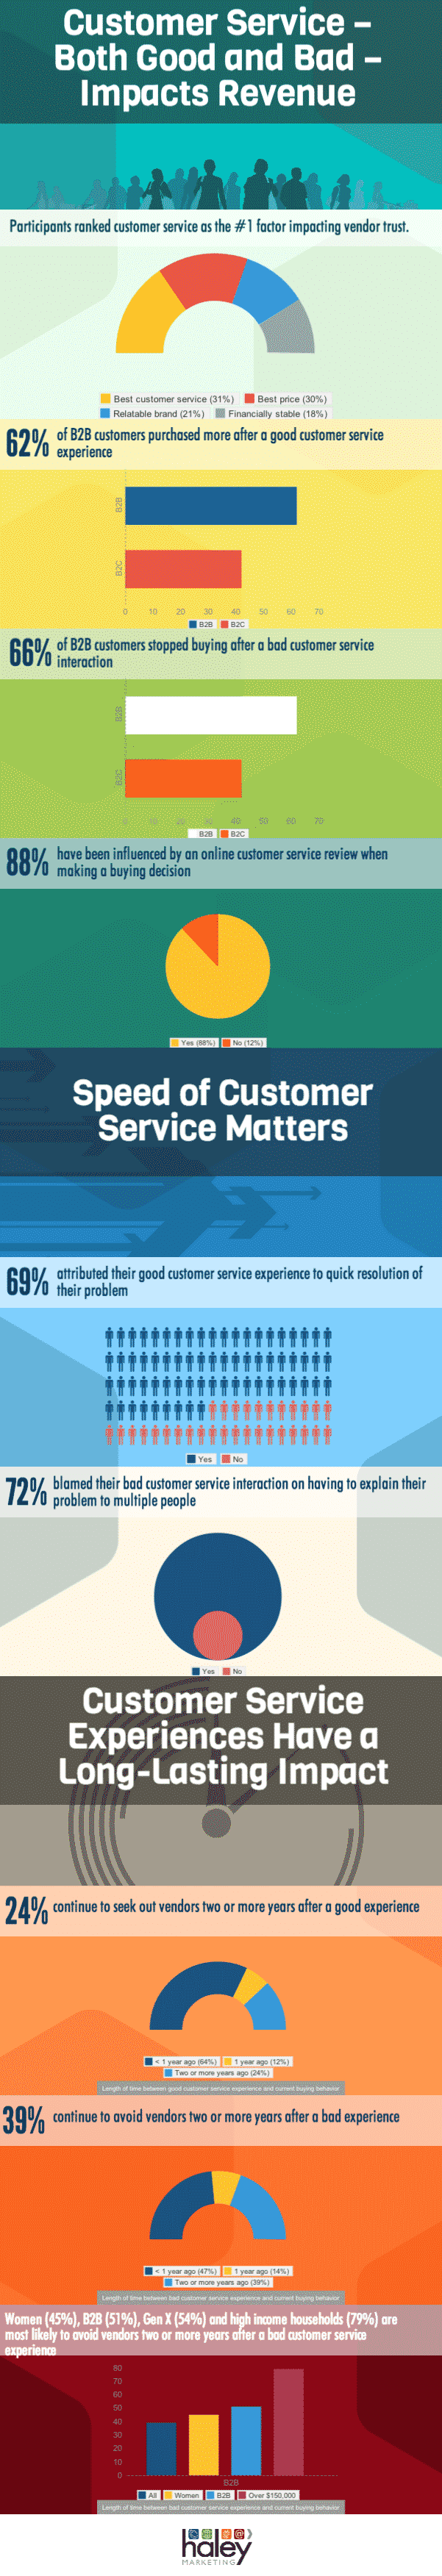 Customer Service – Both Good and Bad – Impacts Revenue